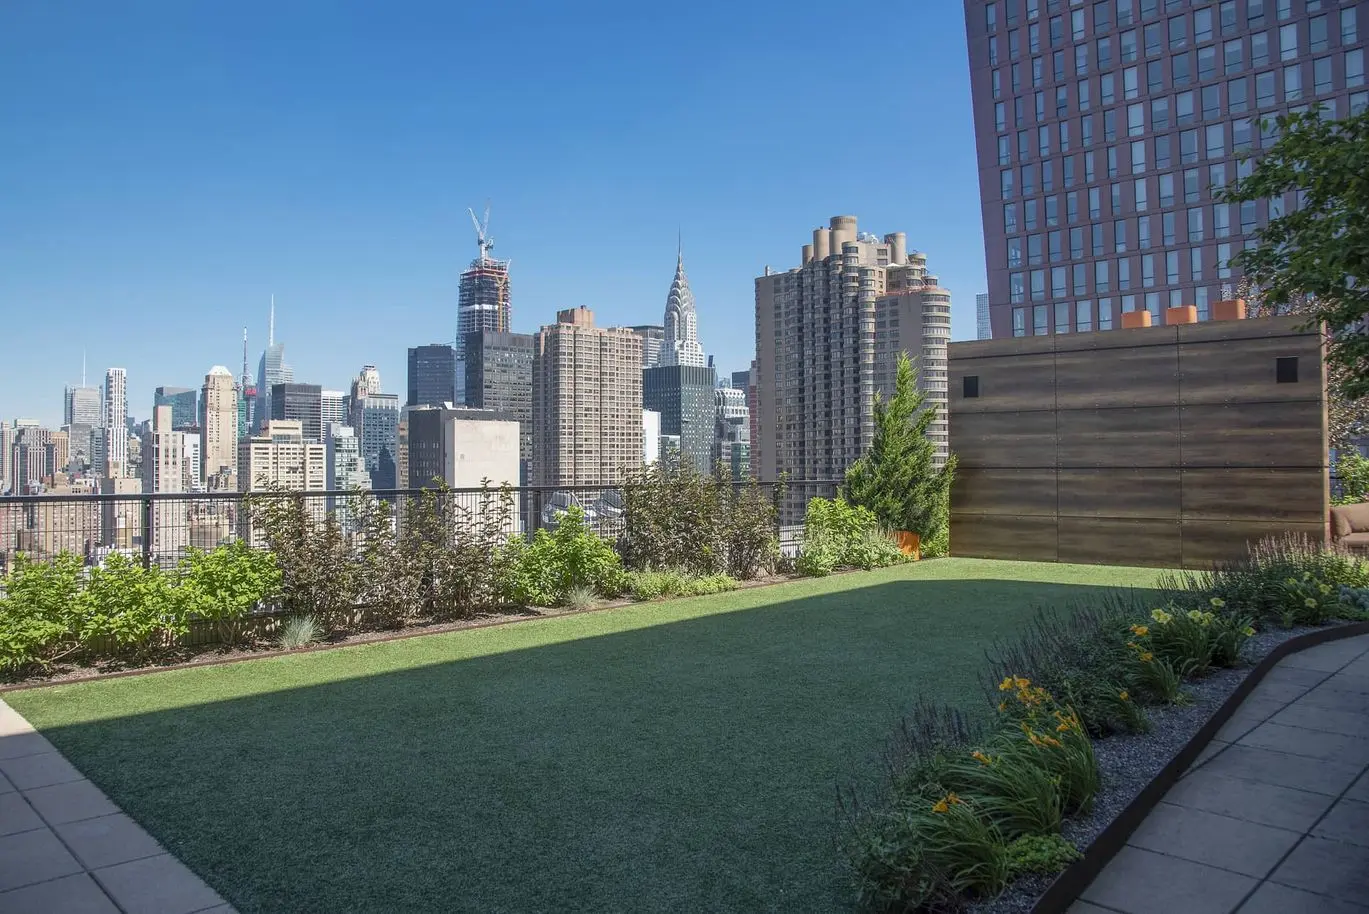 View 34, 401 East 34th Street